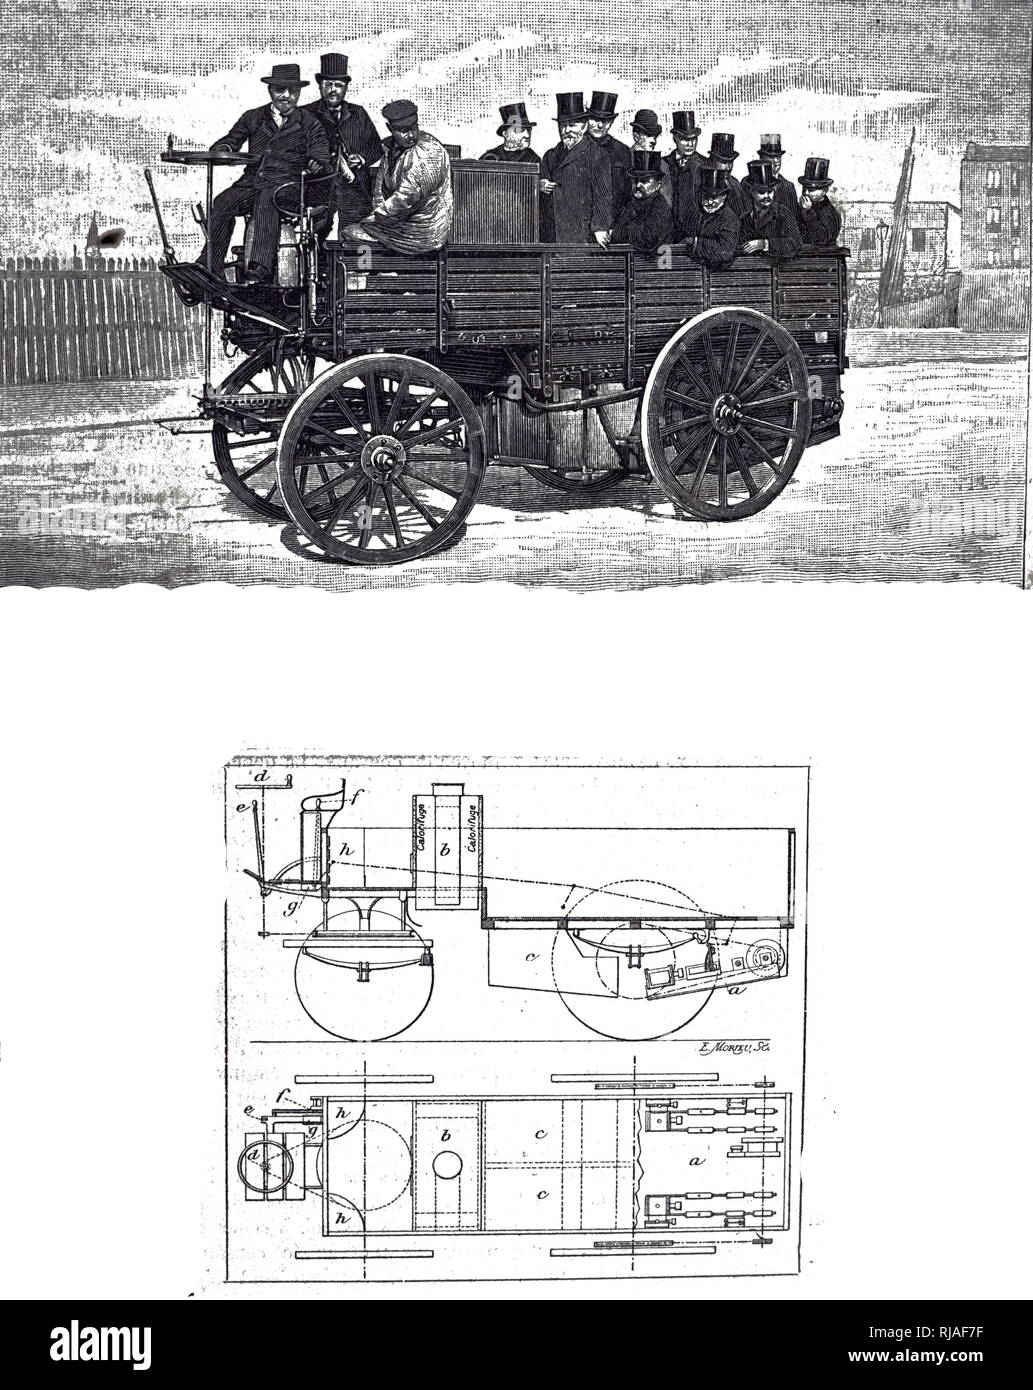 An engraving depicting Leon Serpollet's steam wagon powered by his instantaneous steam generator. Leon Serpollet (1858-1907) a French industrialist and pioneer of steam automobiles. Dated 19th century Stock Photo